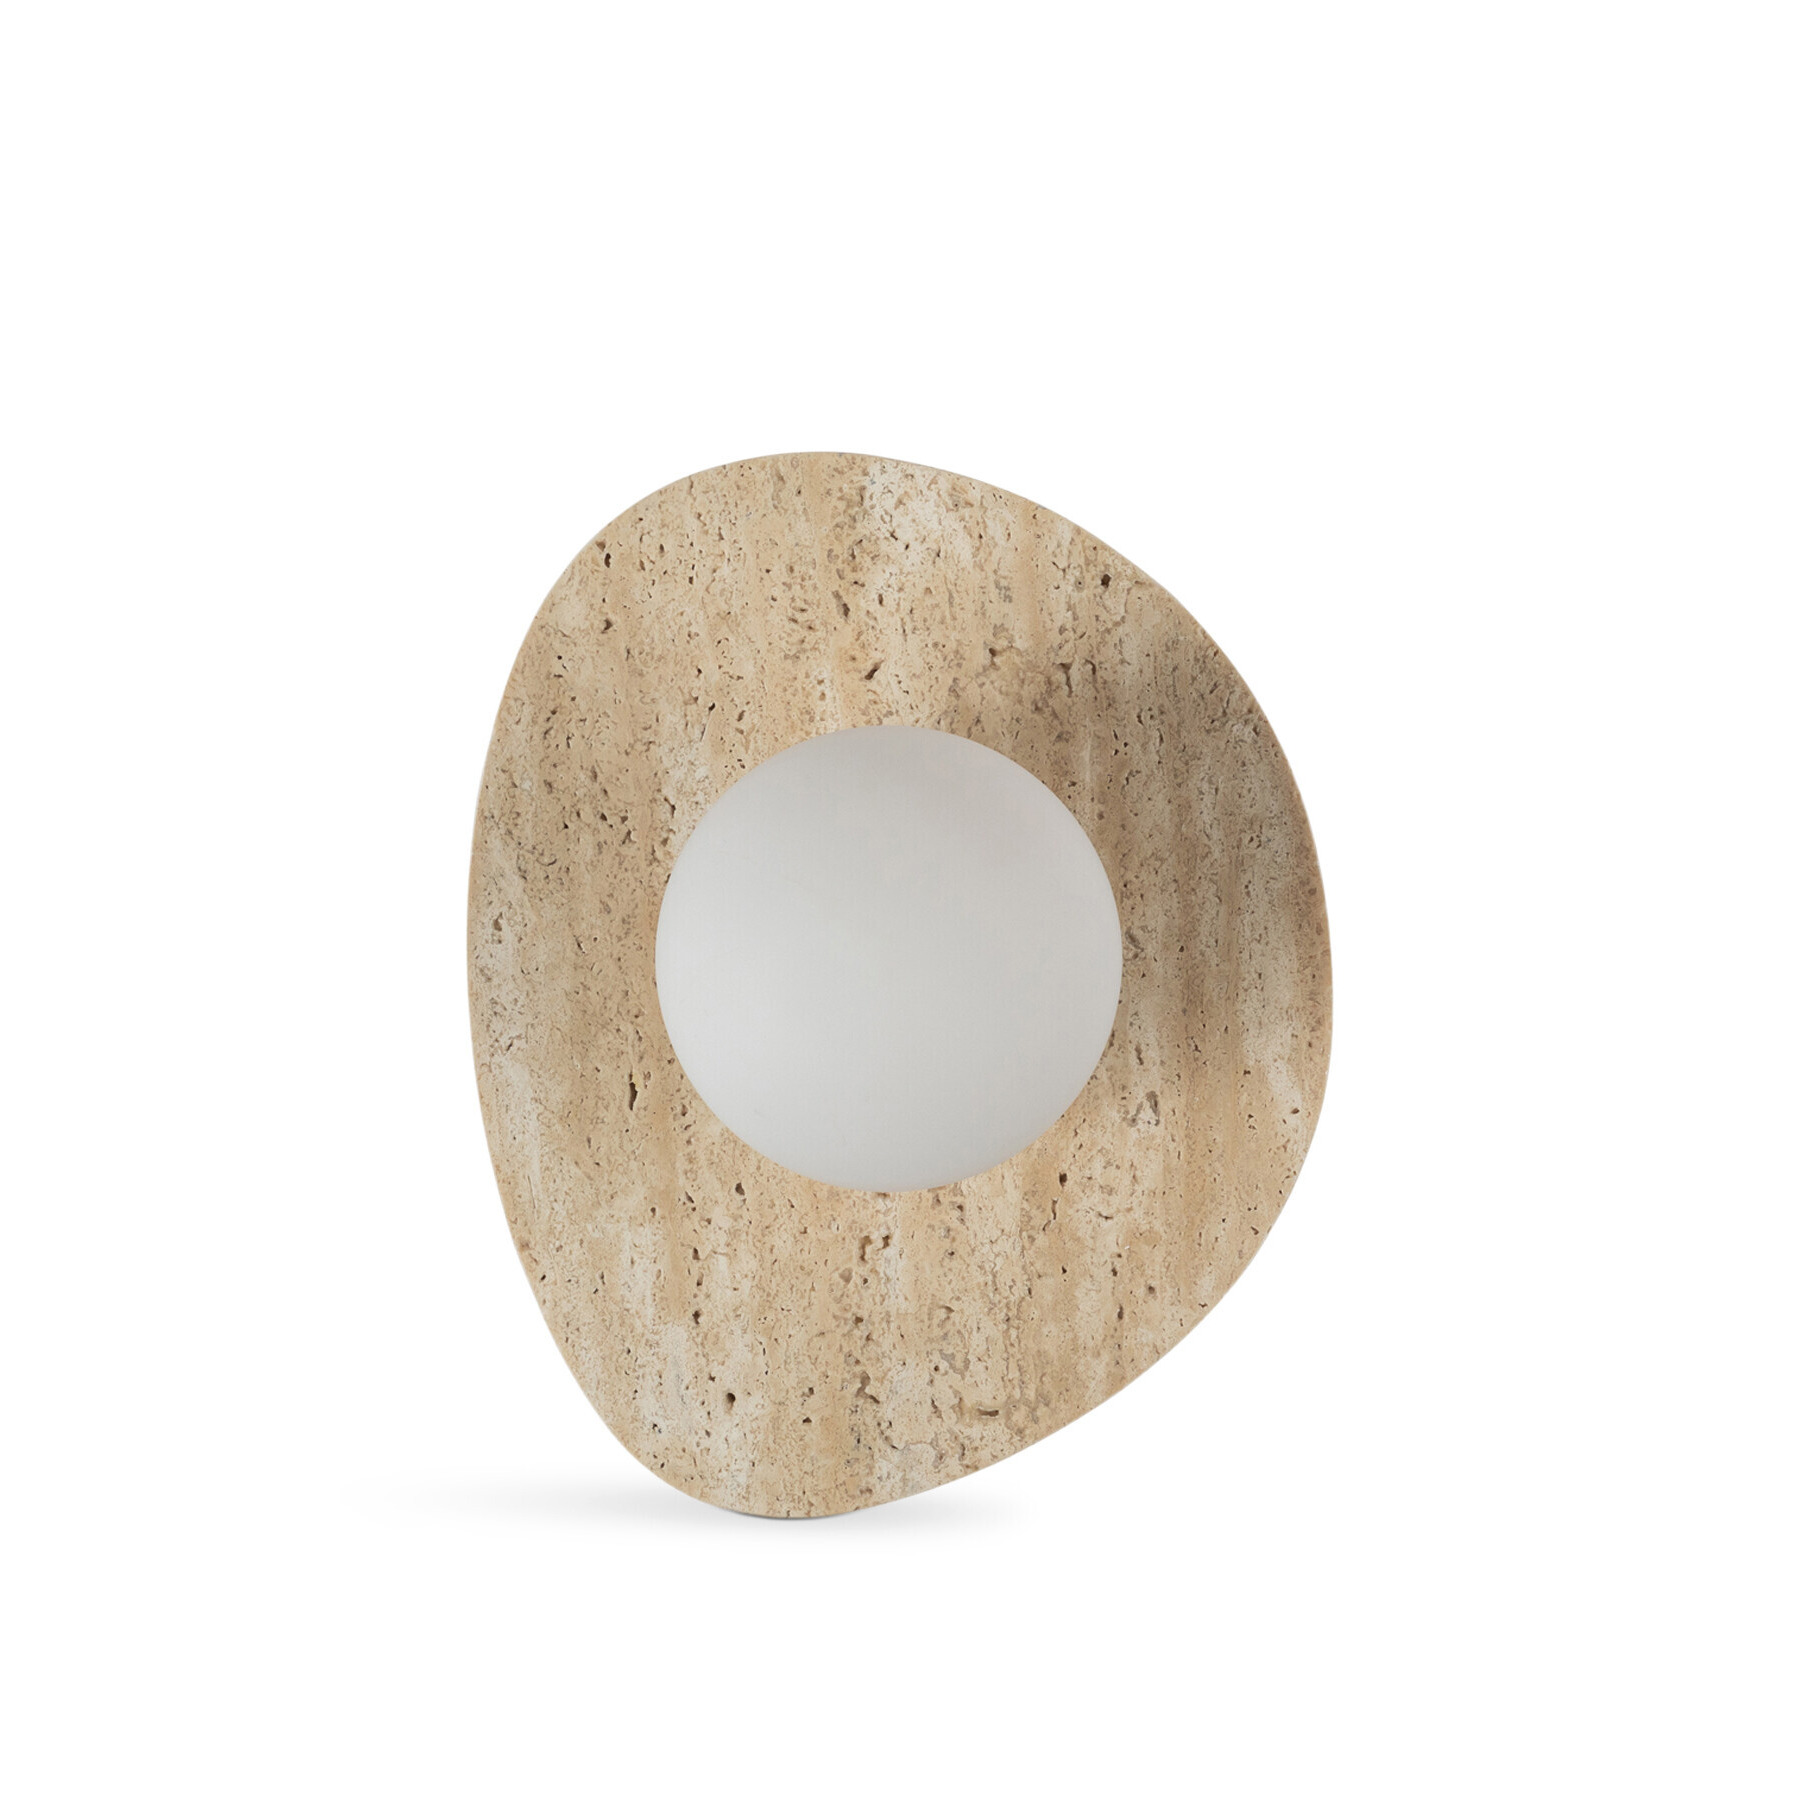 Heal's Element Travertine Stone Wall Light IP44 - Size 24x20x14 Natural - image 1